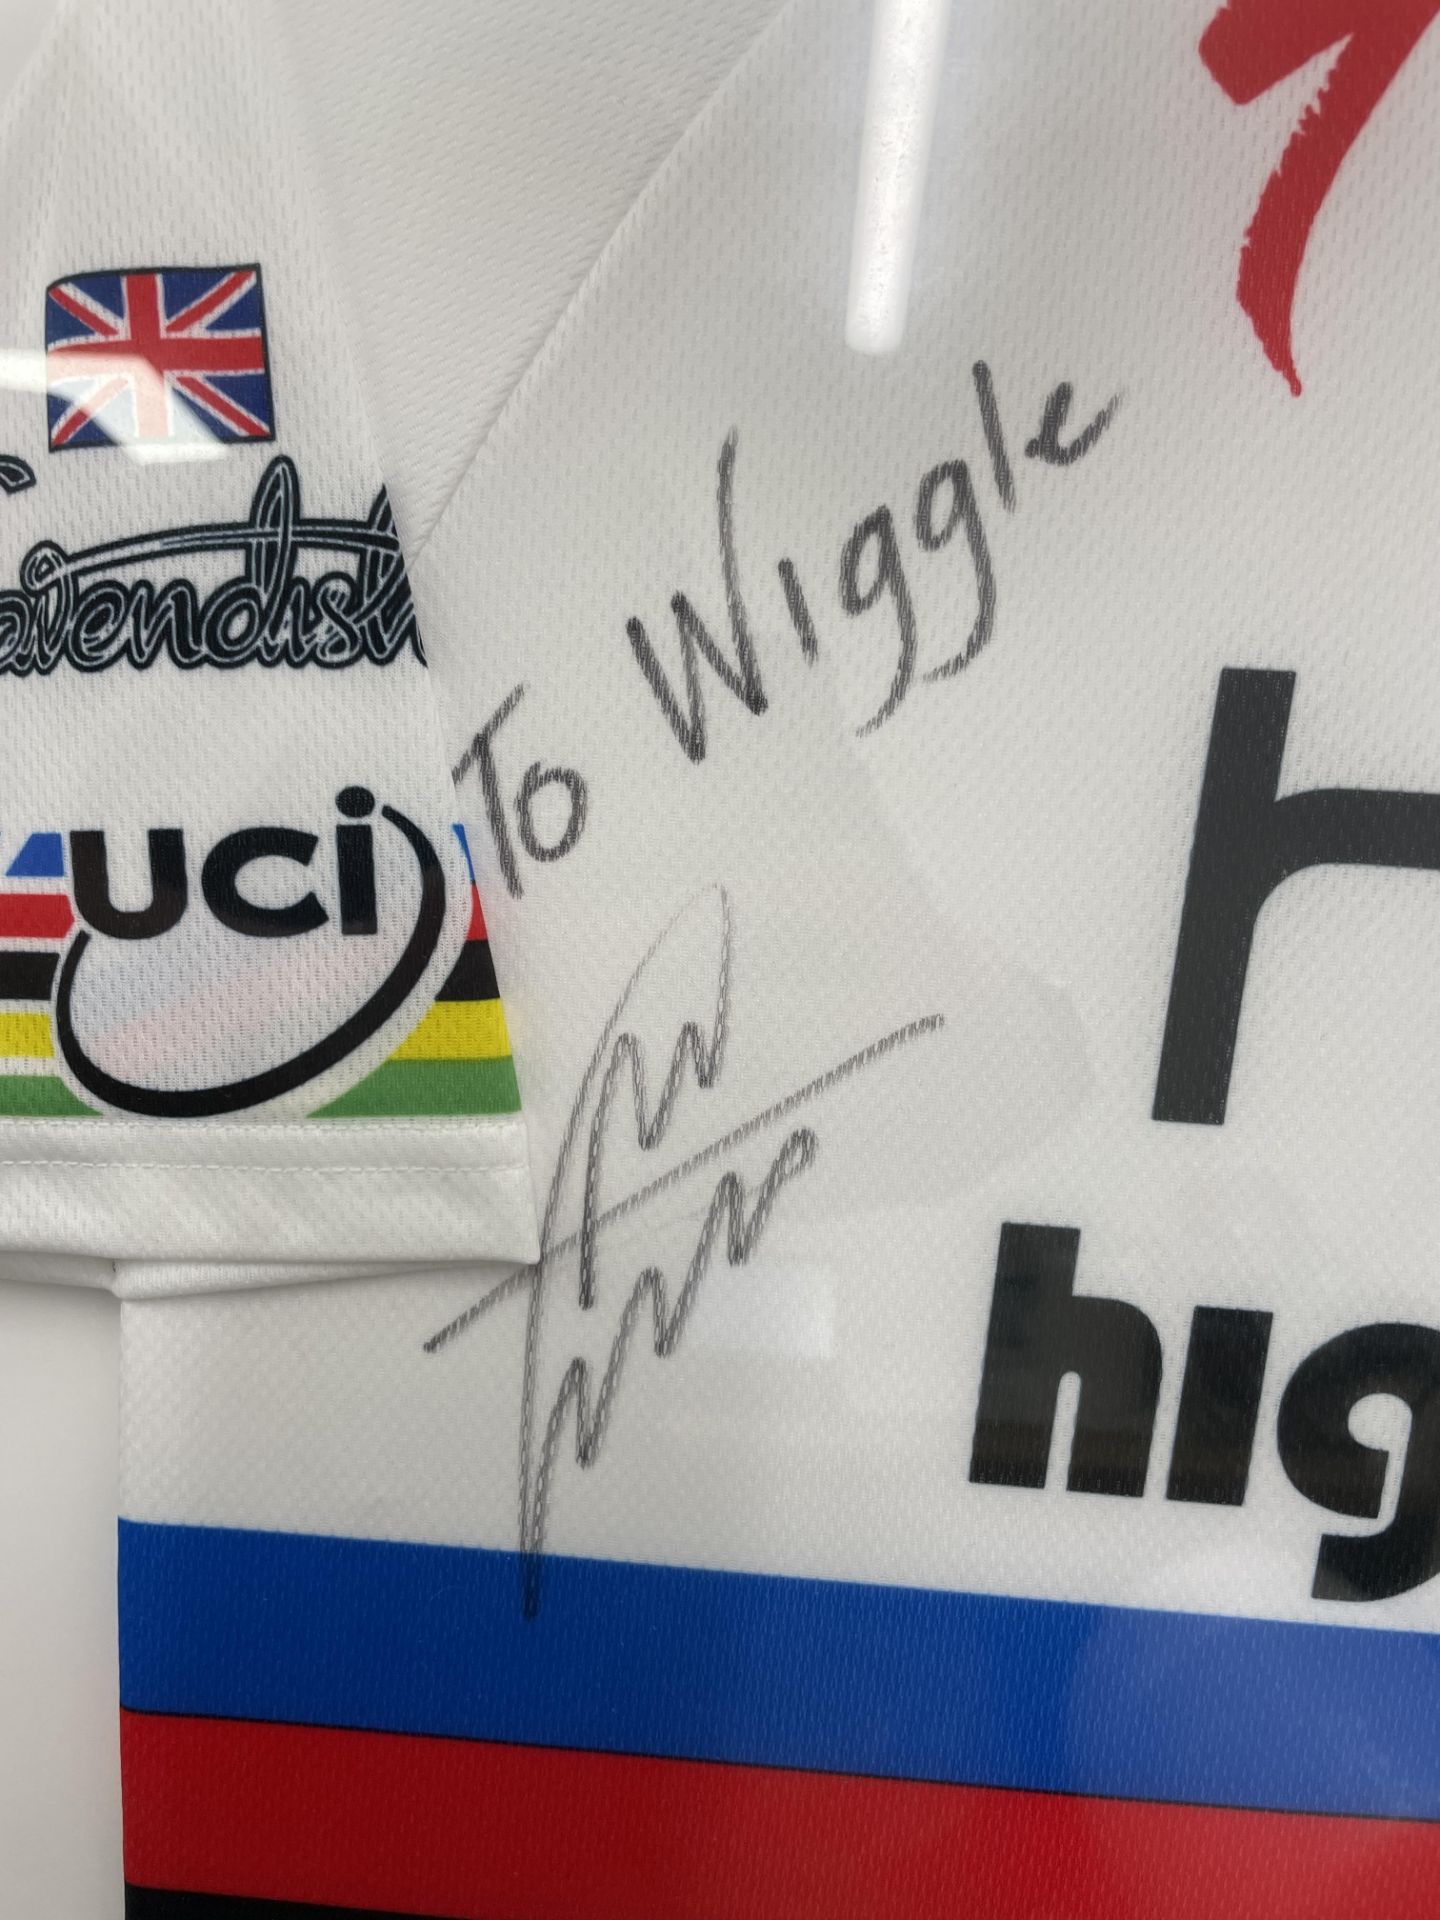 Mark Cavendish Framed & Signed HTC Highroad MOA Skoda Rainbow Cycling Jersey (Circa 2010) - Image 2 of 2